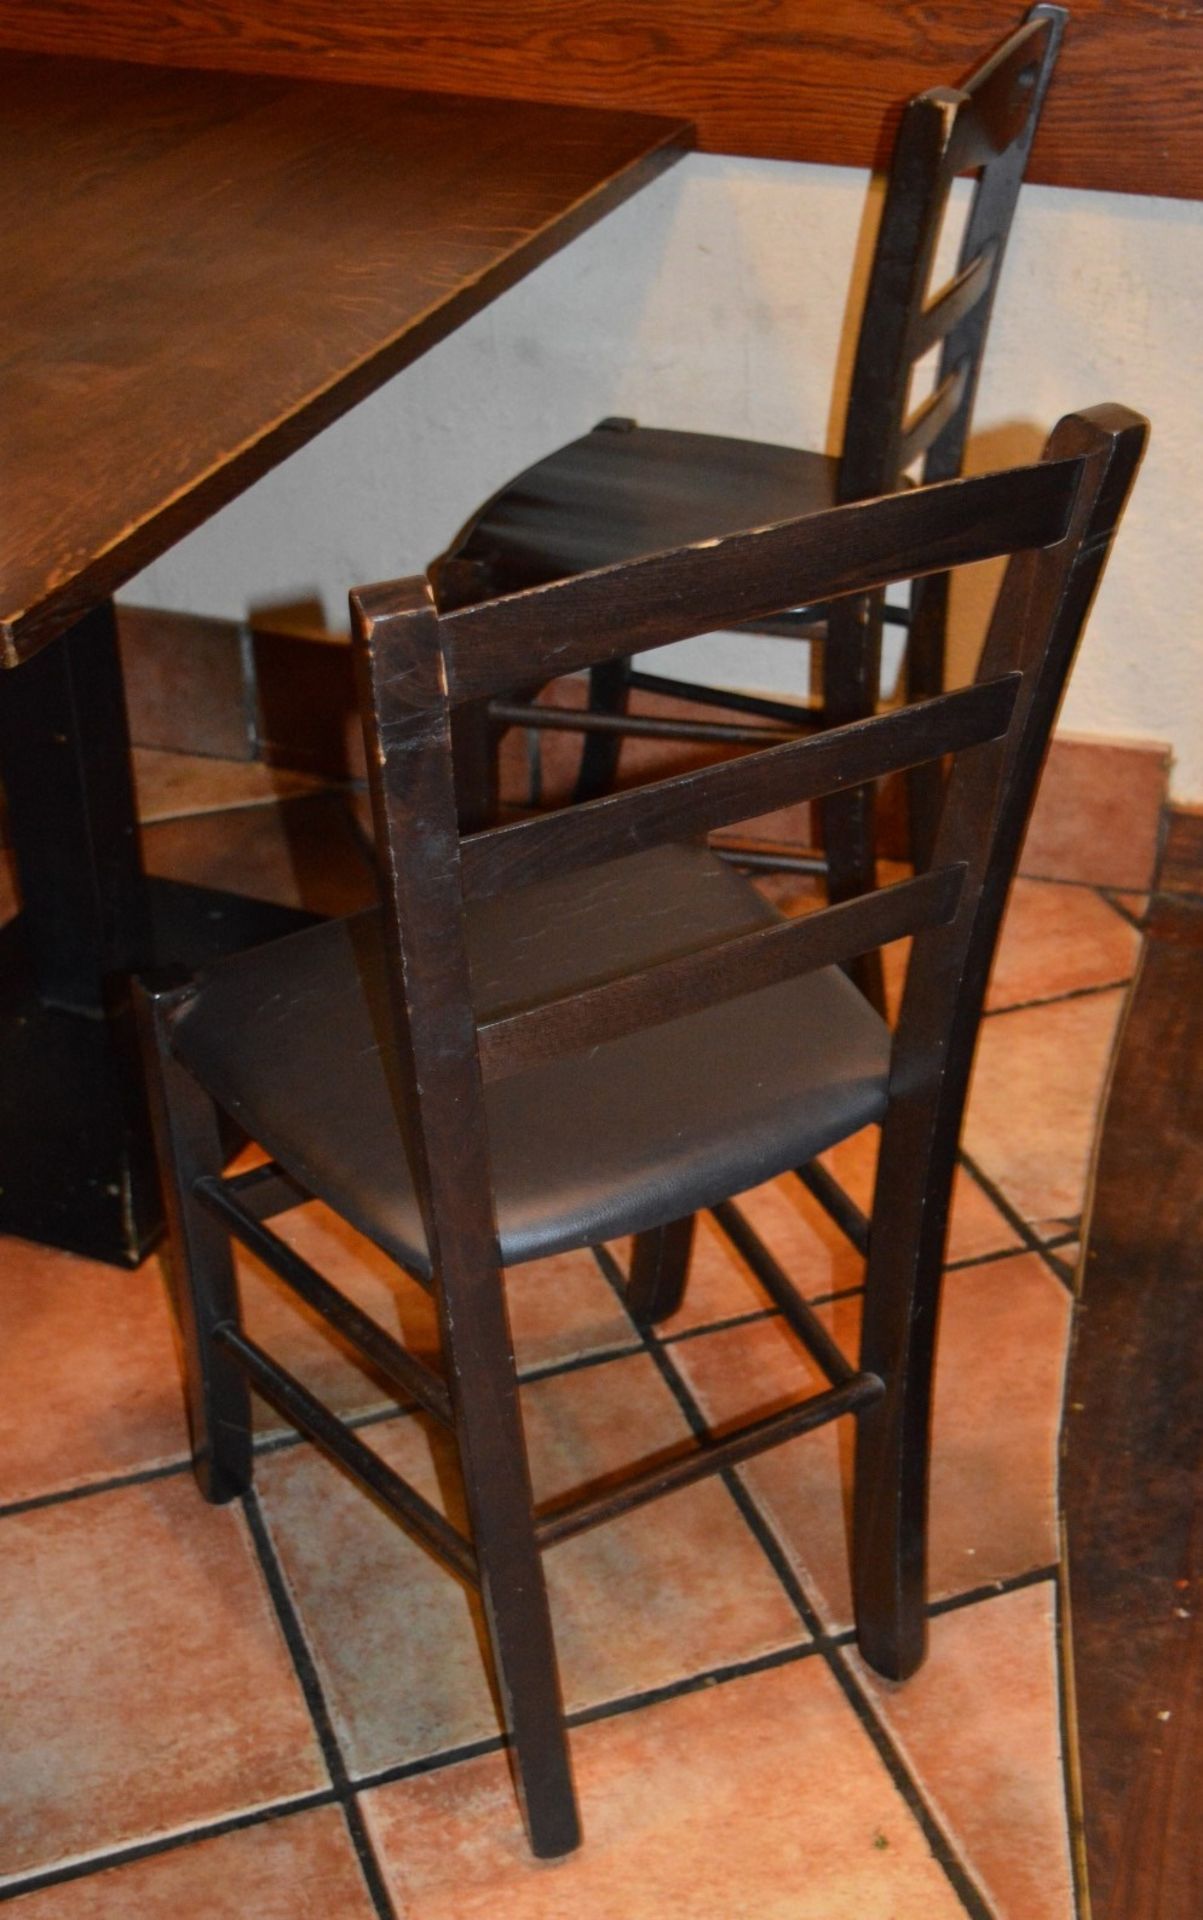 10 x Assorted Rustic Restaurant Dining Chairs - Taken From A Popular Eatery - Manchester M17 - Image 2 of 6